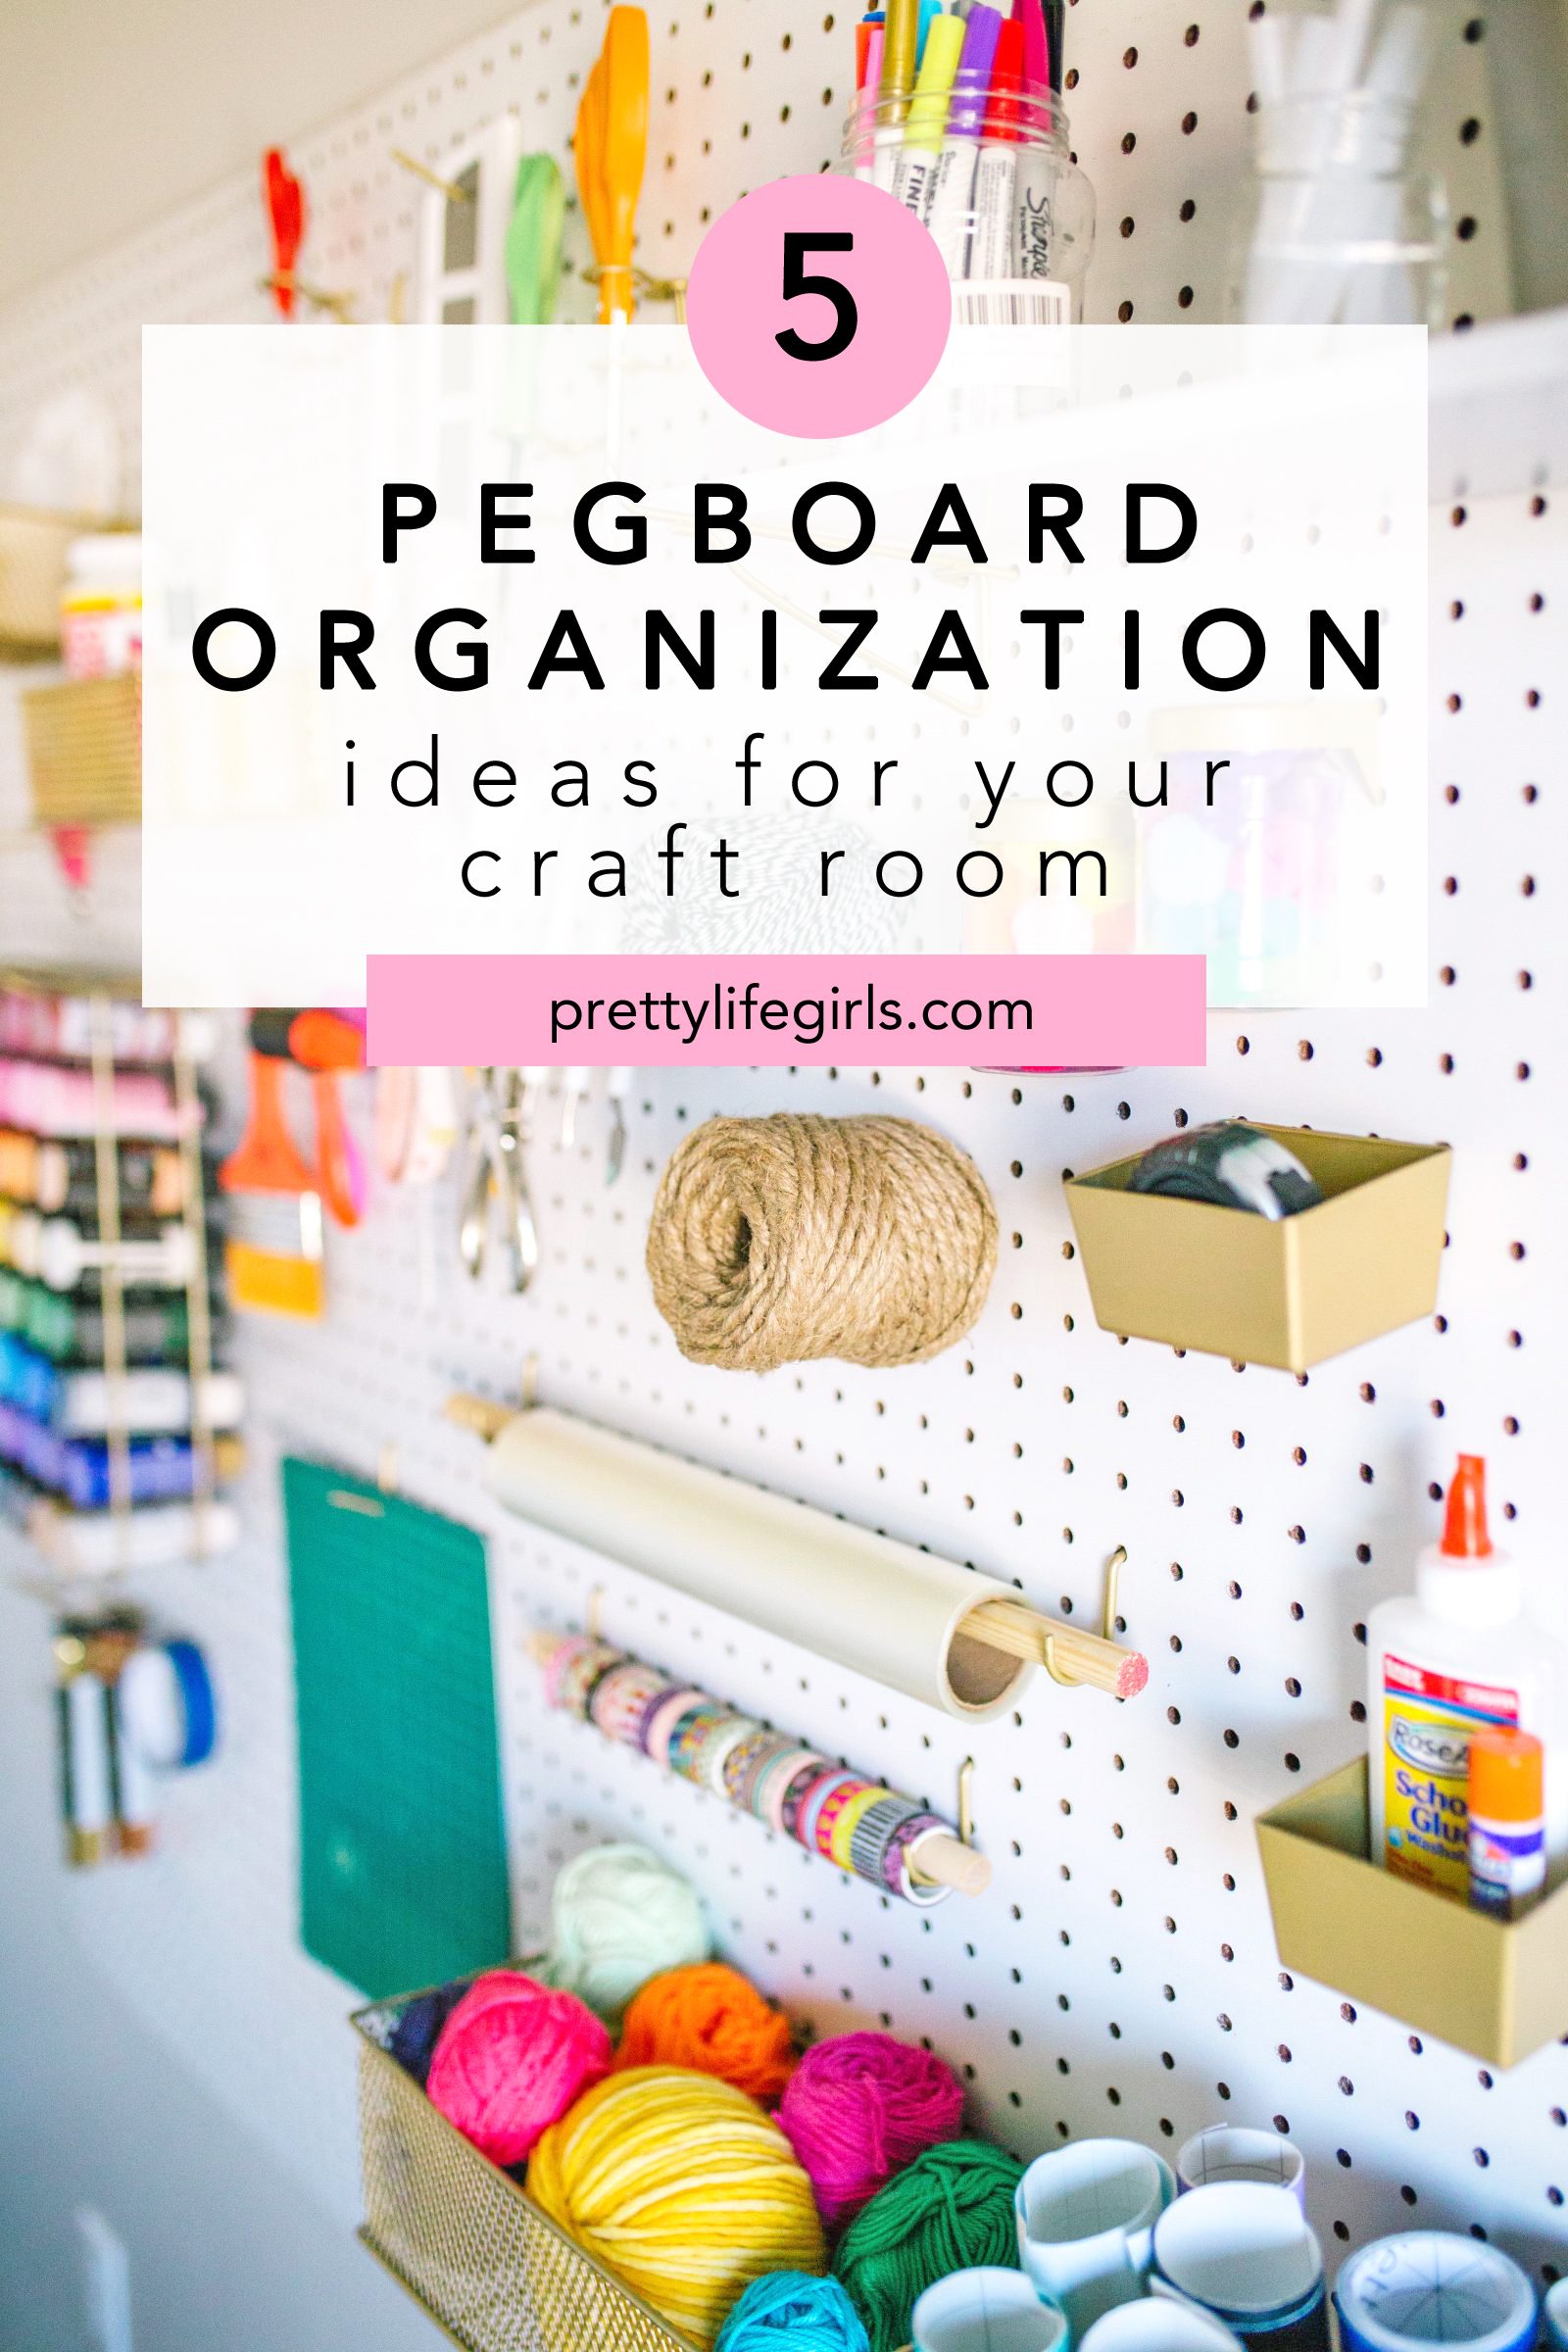 Is there a trick for pegboard hooks? : r/Tools